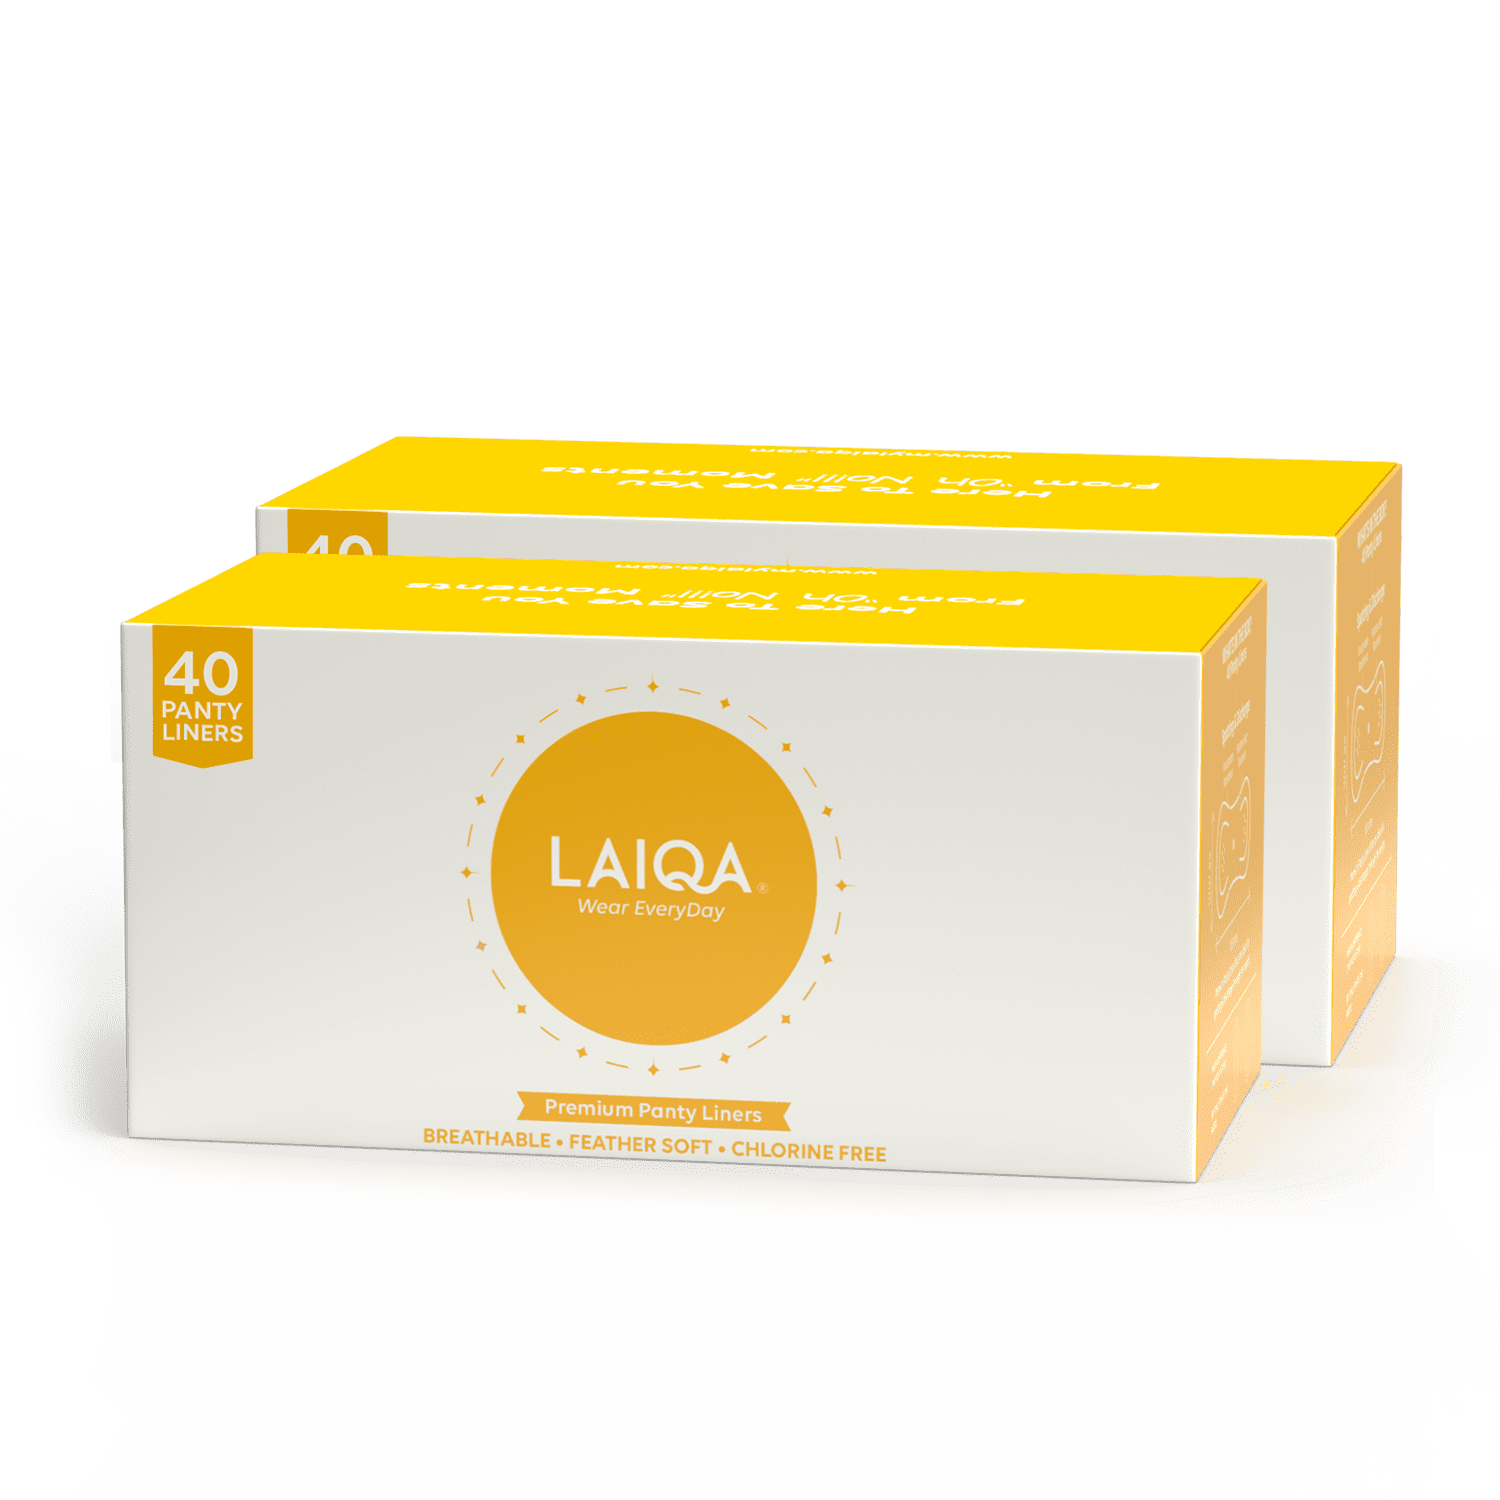 LAIQA Panty Liners (2 Pack of 40 Pads Each)